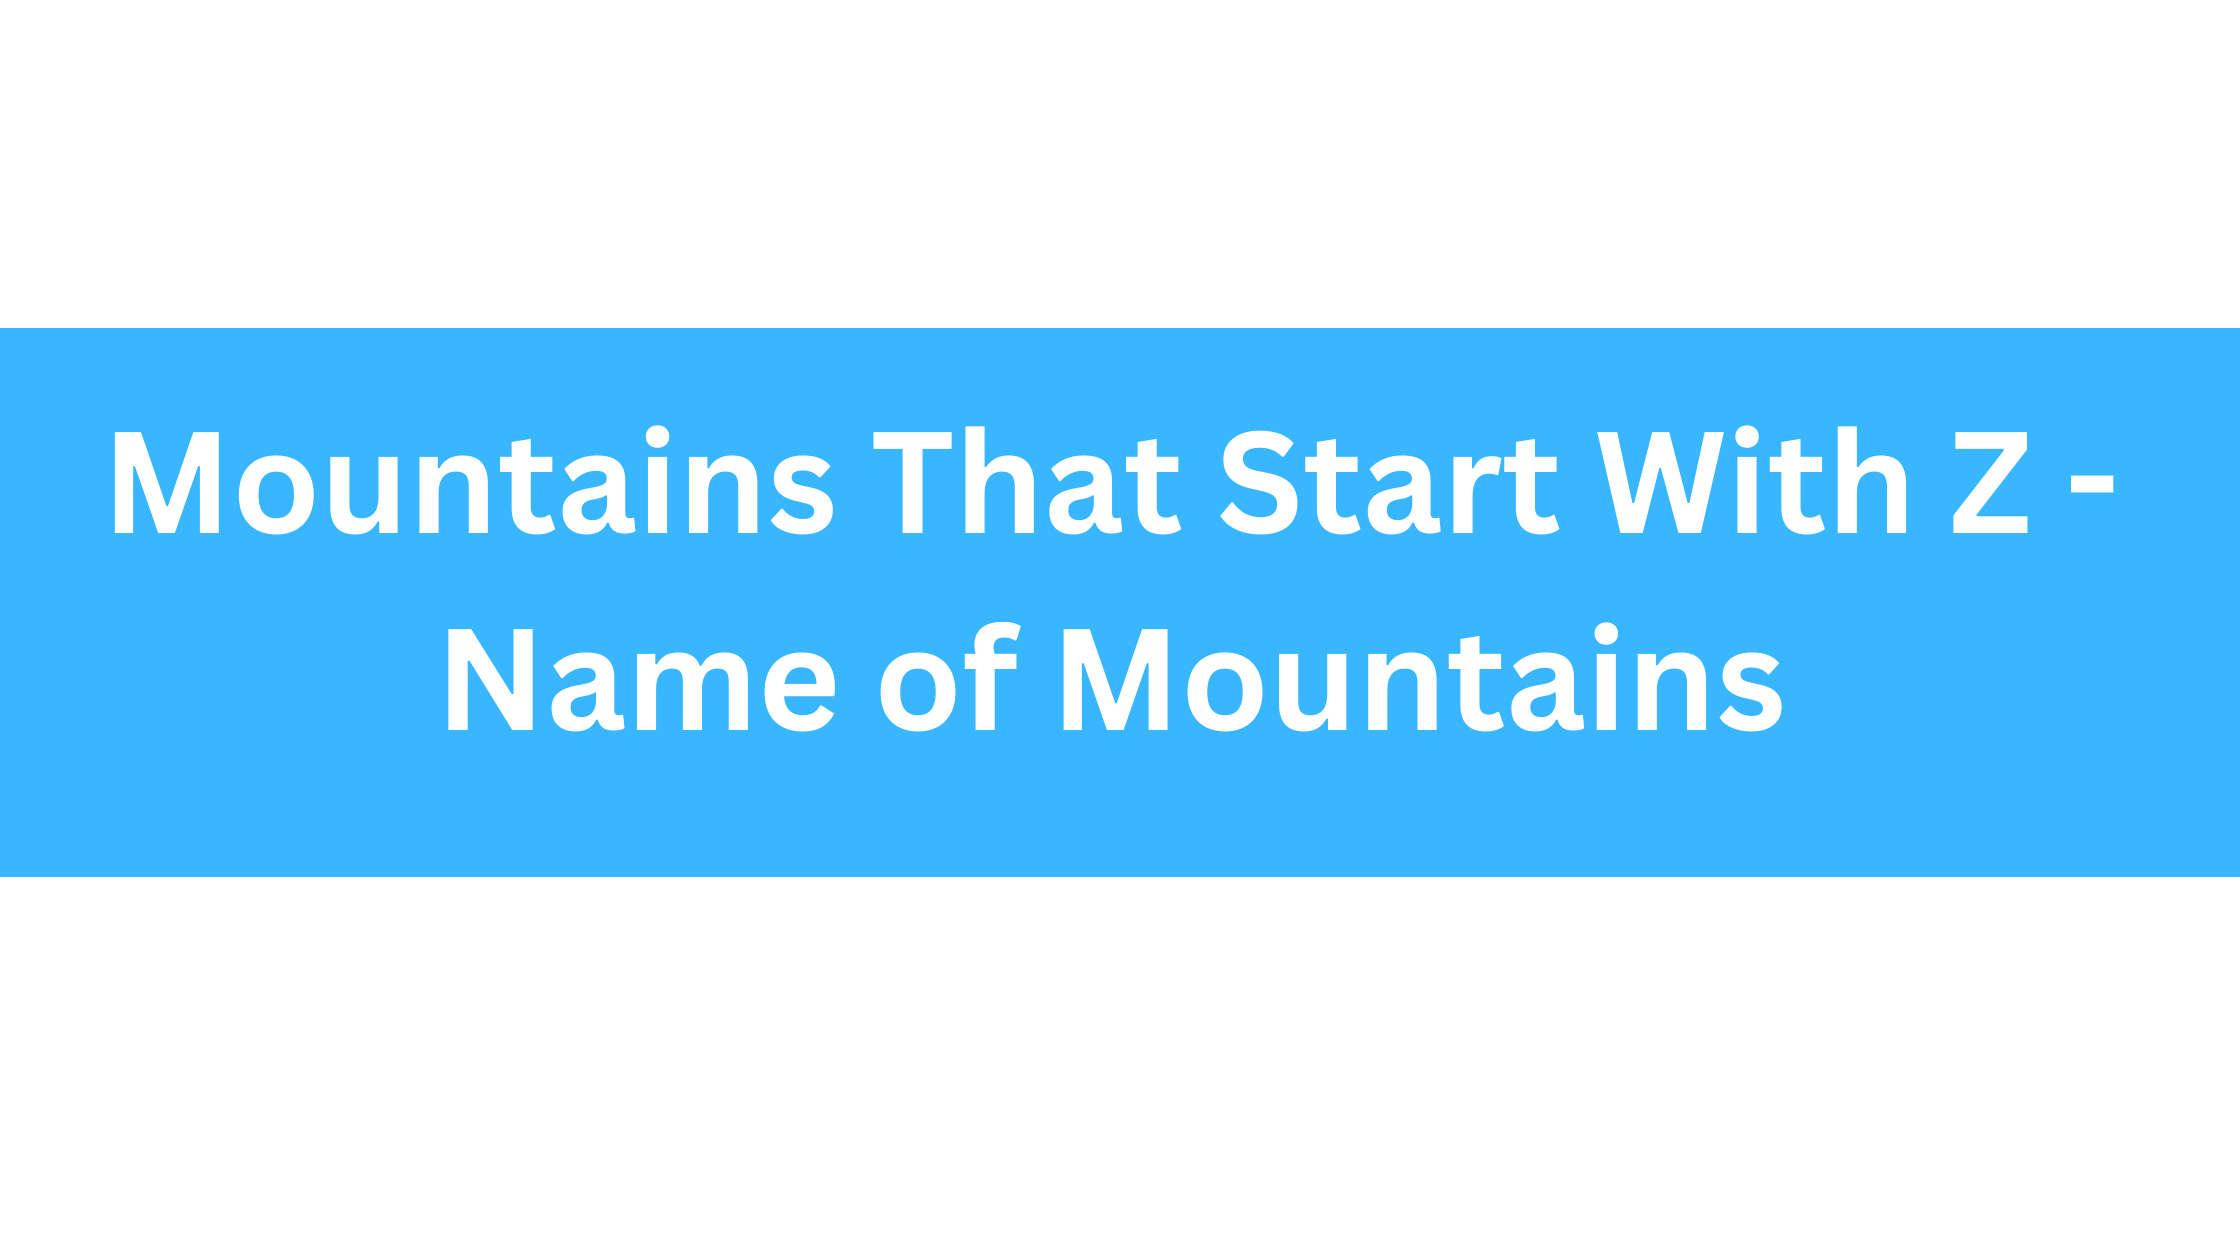 Mountains That Start With Z